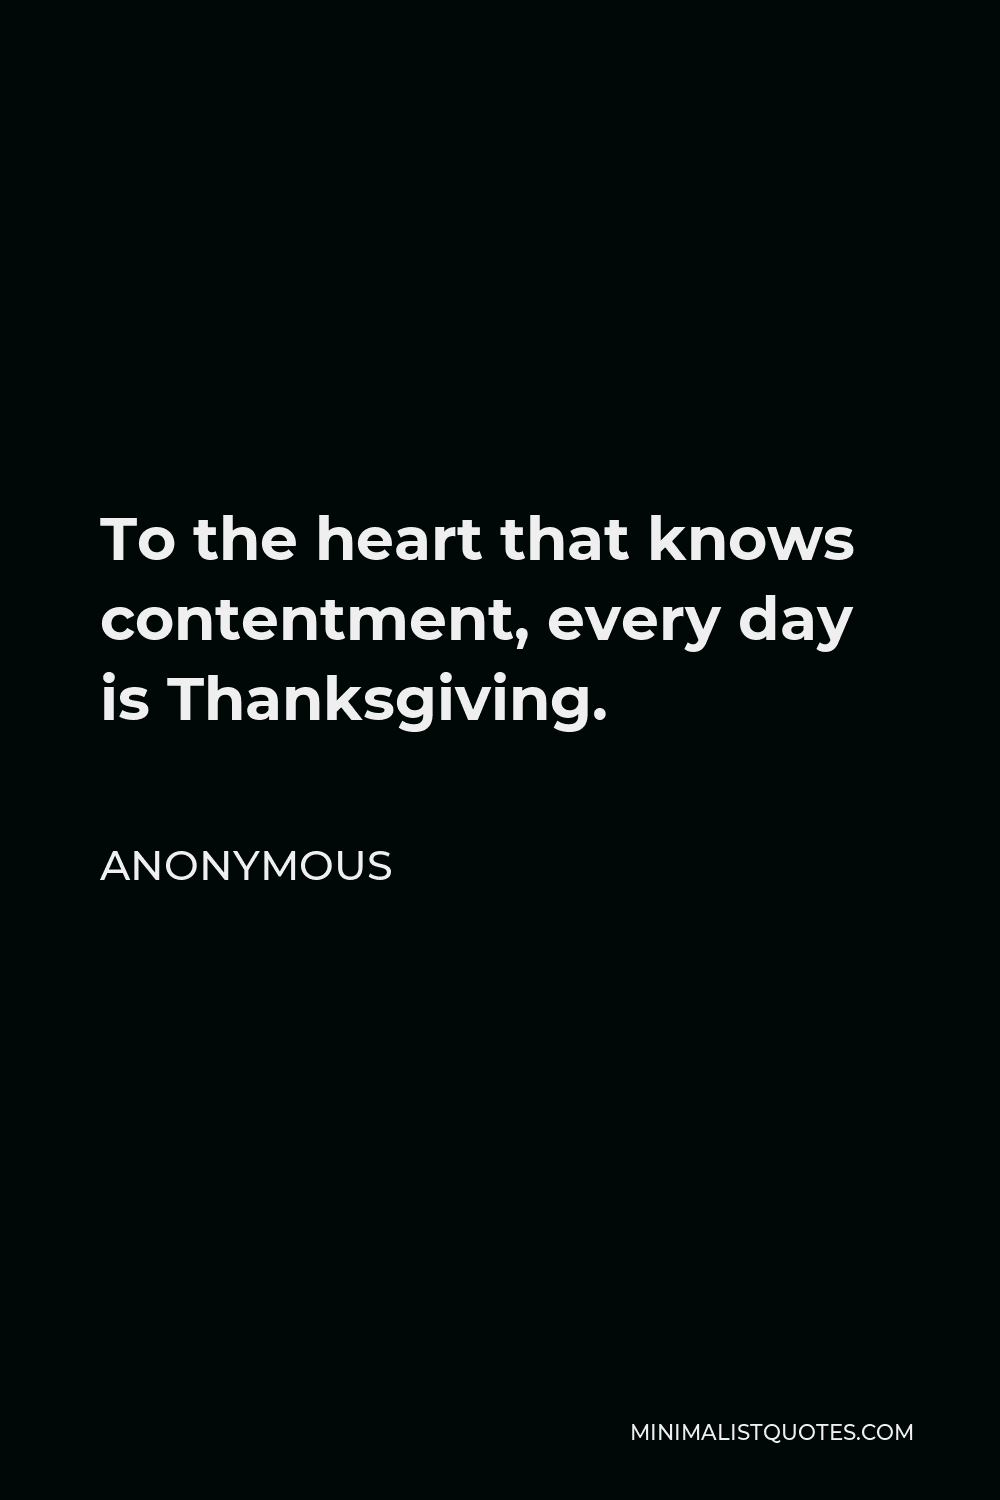 Anonymous Quote - To the heart that knows contentment, every day is Thanksgiving.